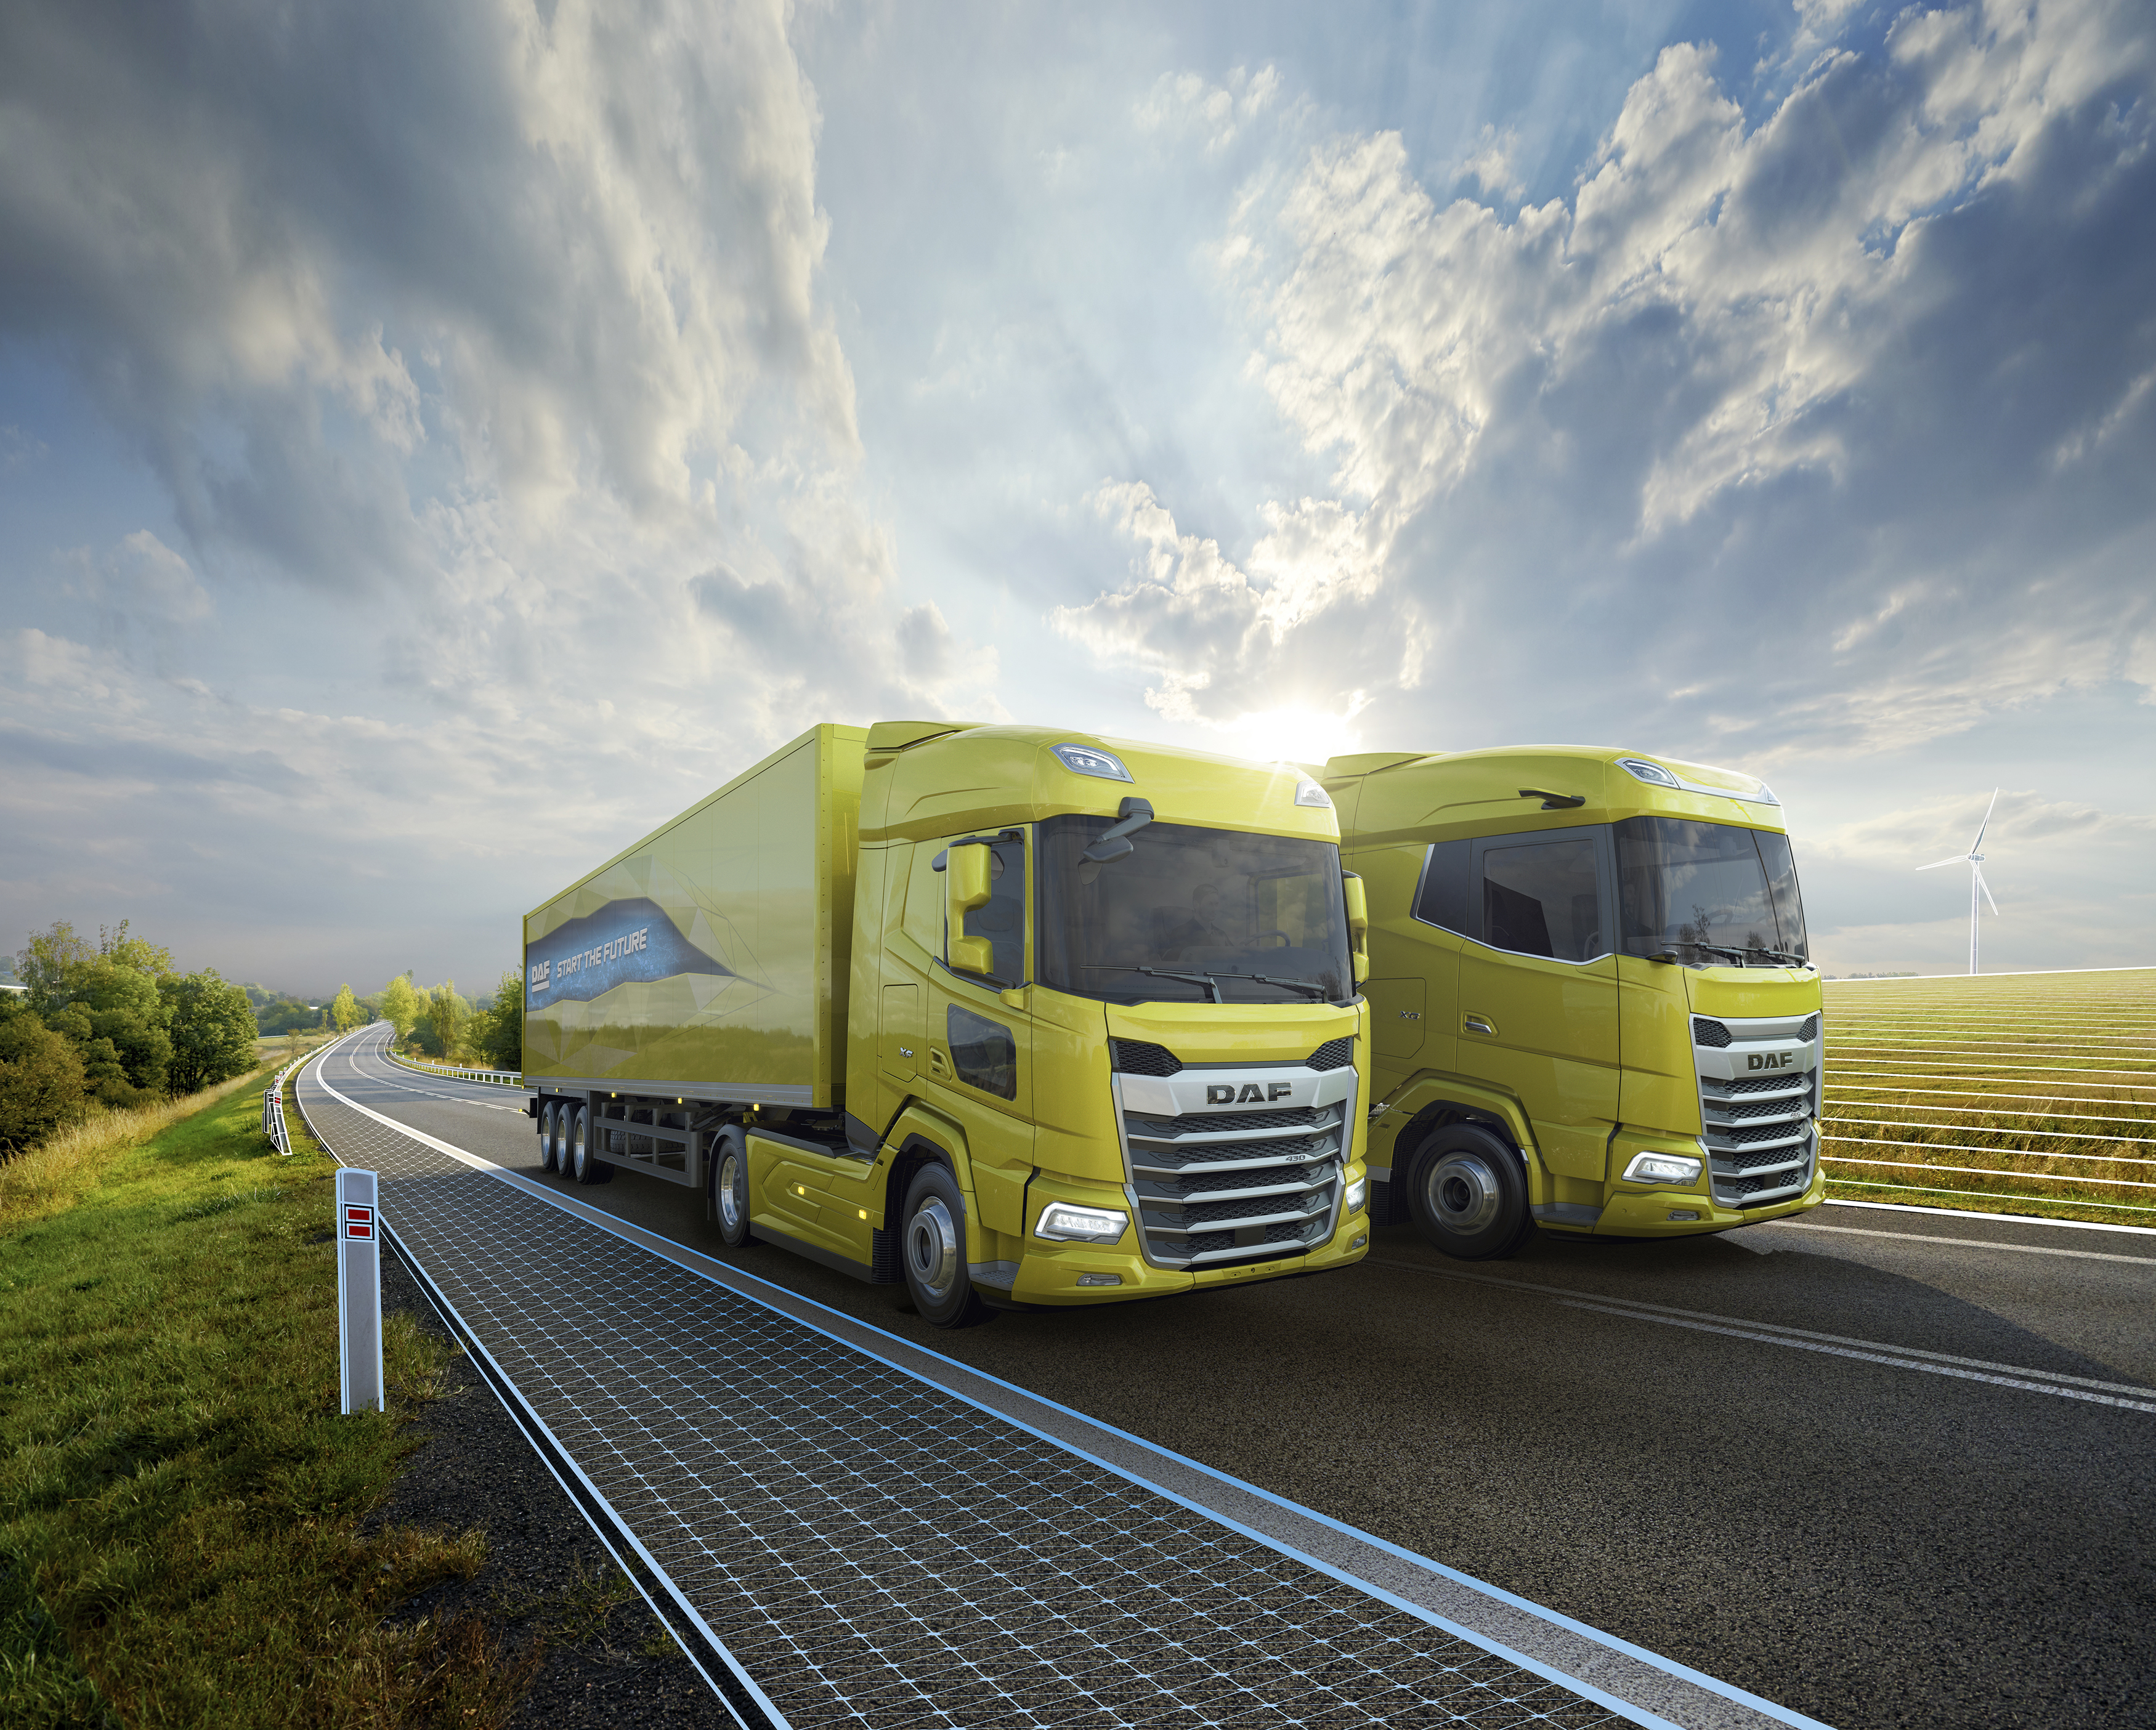 4.4 The New Generation DAF trucks XF (left) and XG (right)